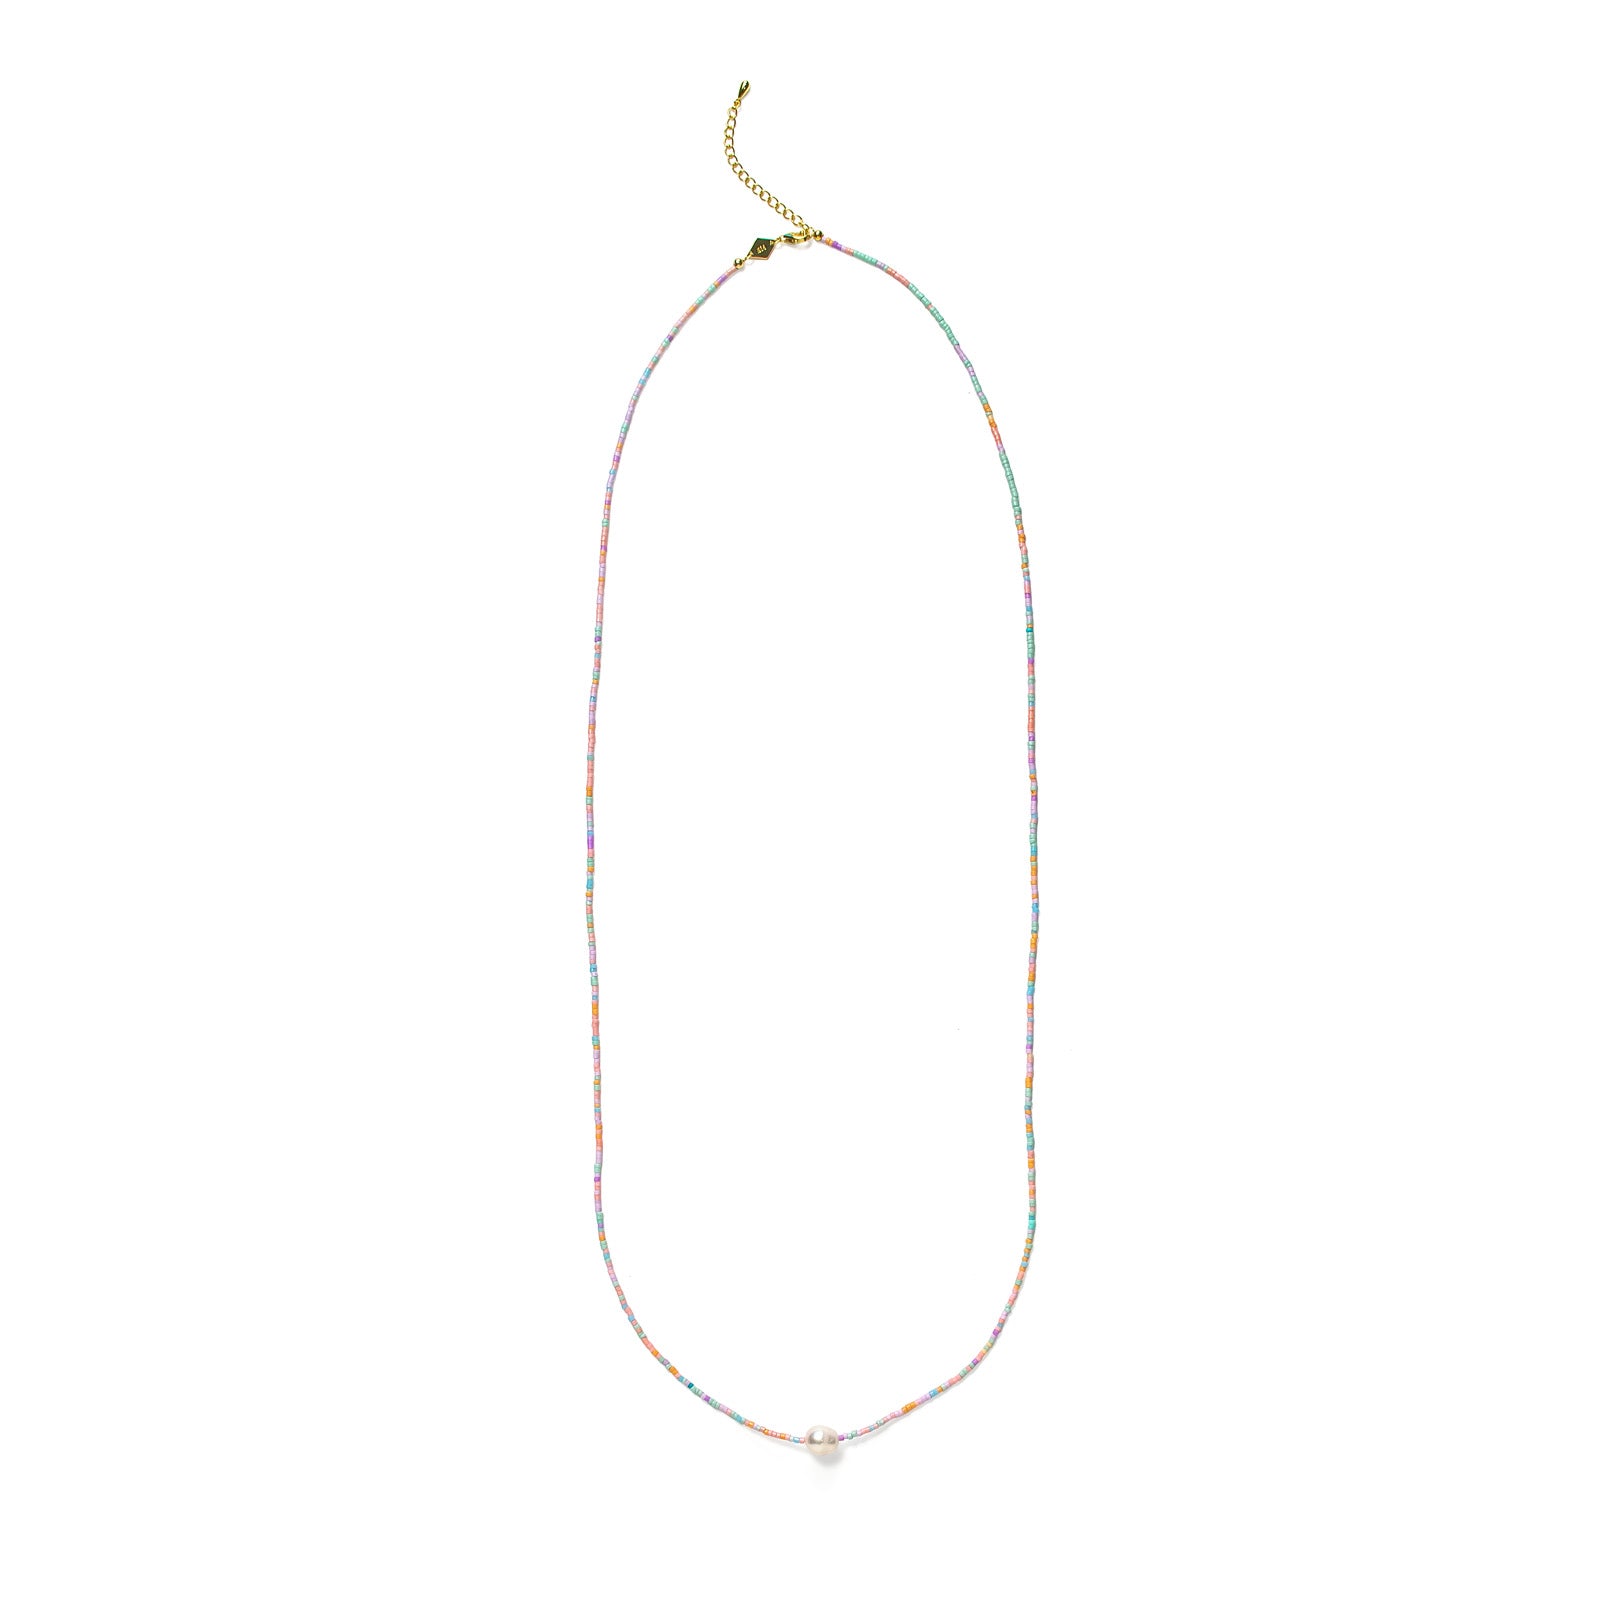 Lola Pearl (Long) Necklace